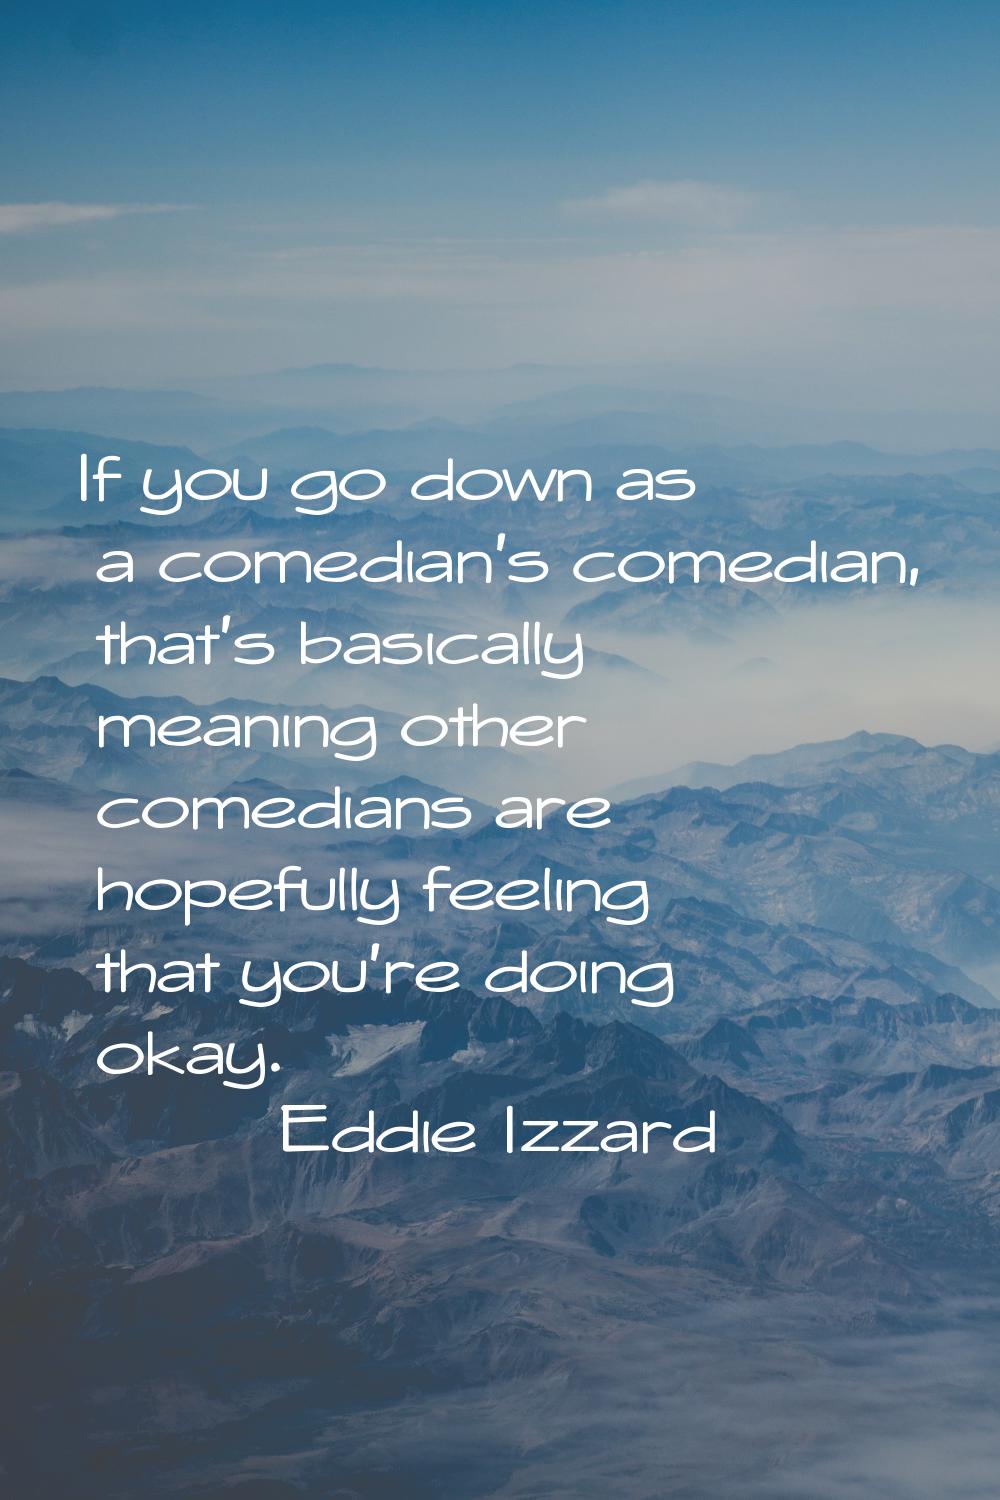 If you go down as a comedian's comedian, that's basically meaning other comedians are hopefully fee